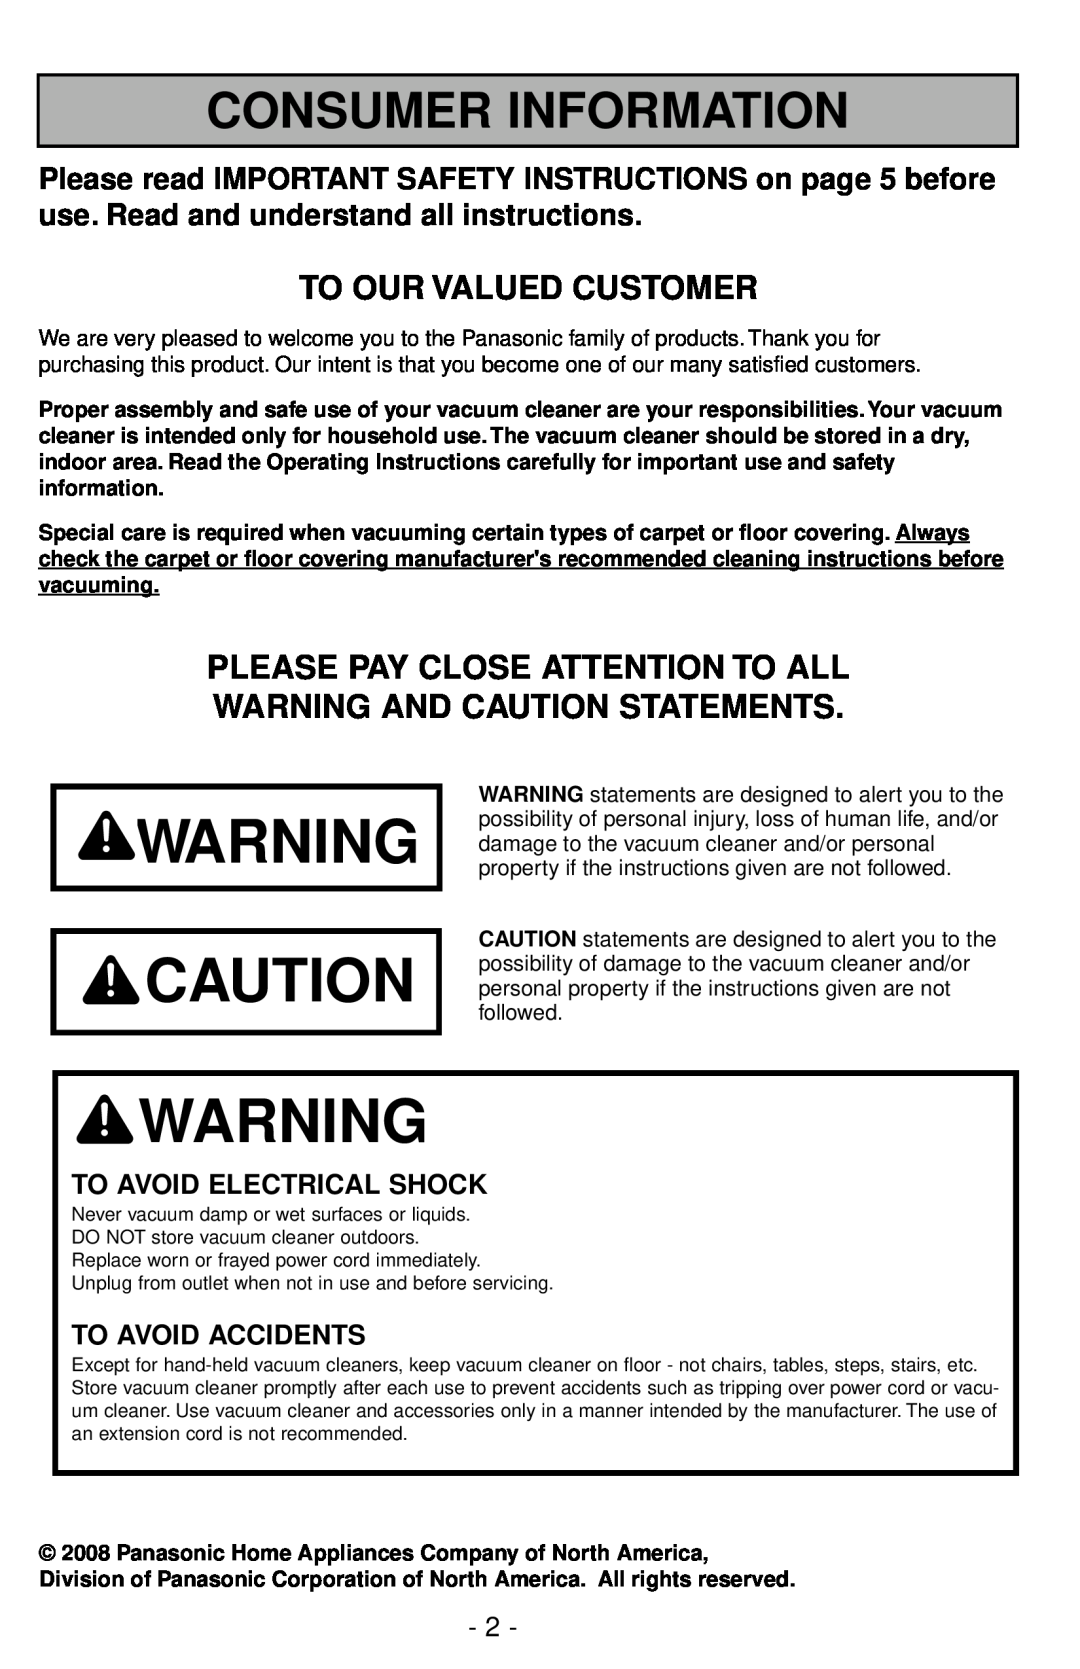 Panasonic MC-UG787 Consumer Information, To Our Valued Customer, Please Pay Close Attention To All, To Avoid Accidents 